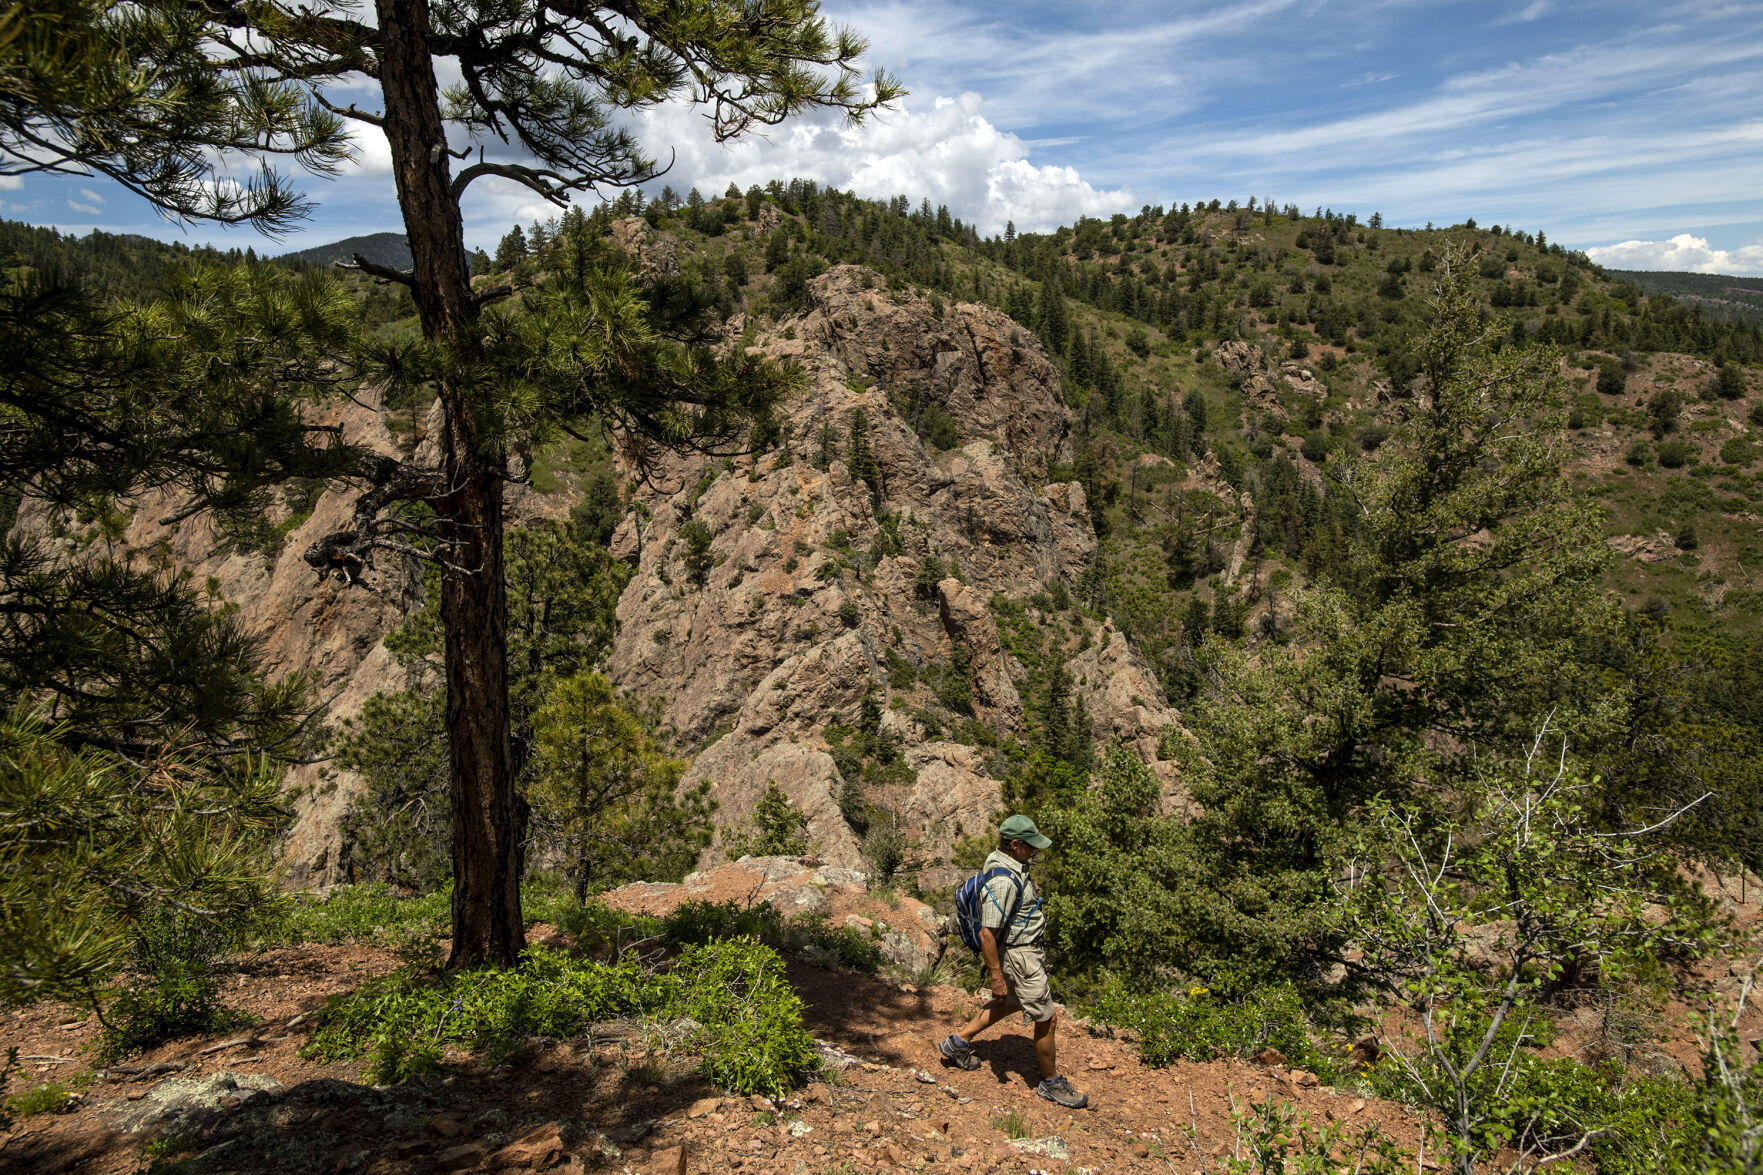 A scenic mountain park awaits former glory in southern Colorado